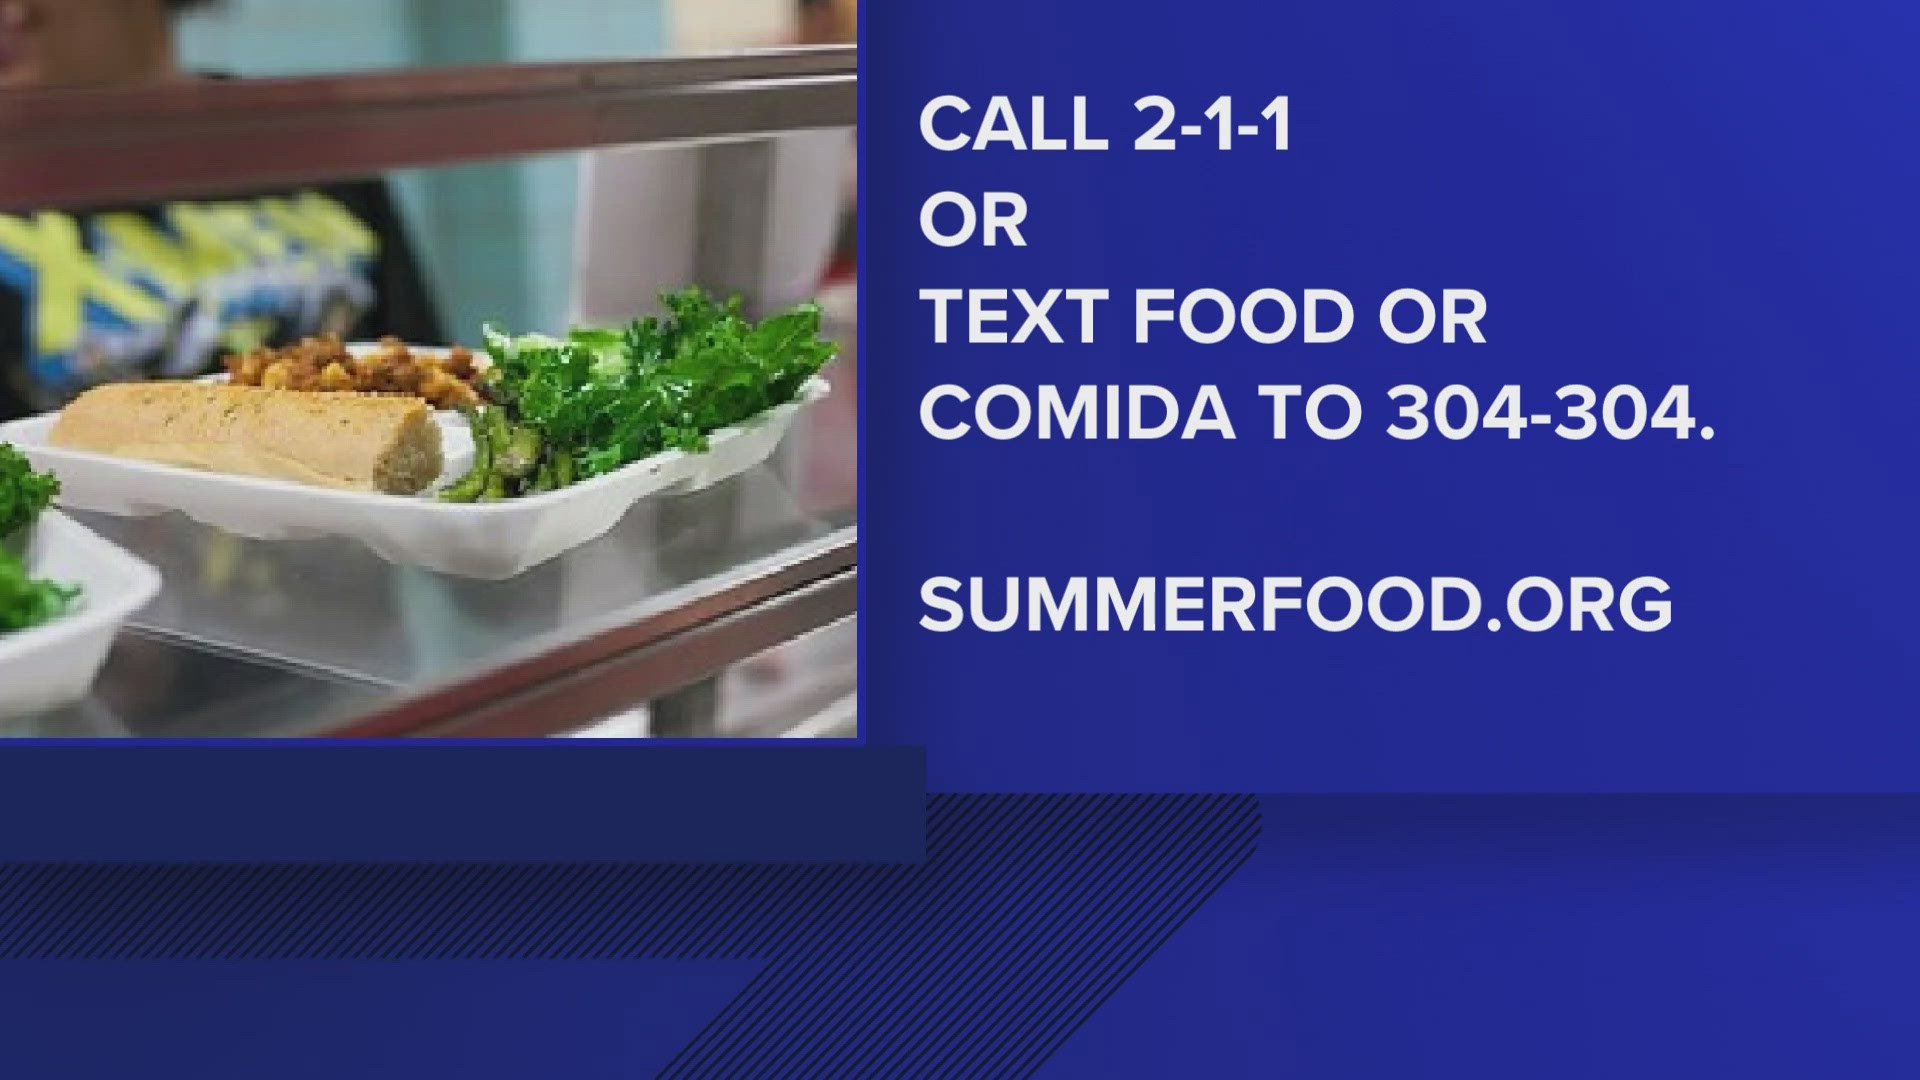 NEISD will offer free meals this summer for all children 18 and under